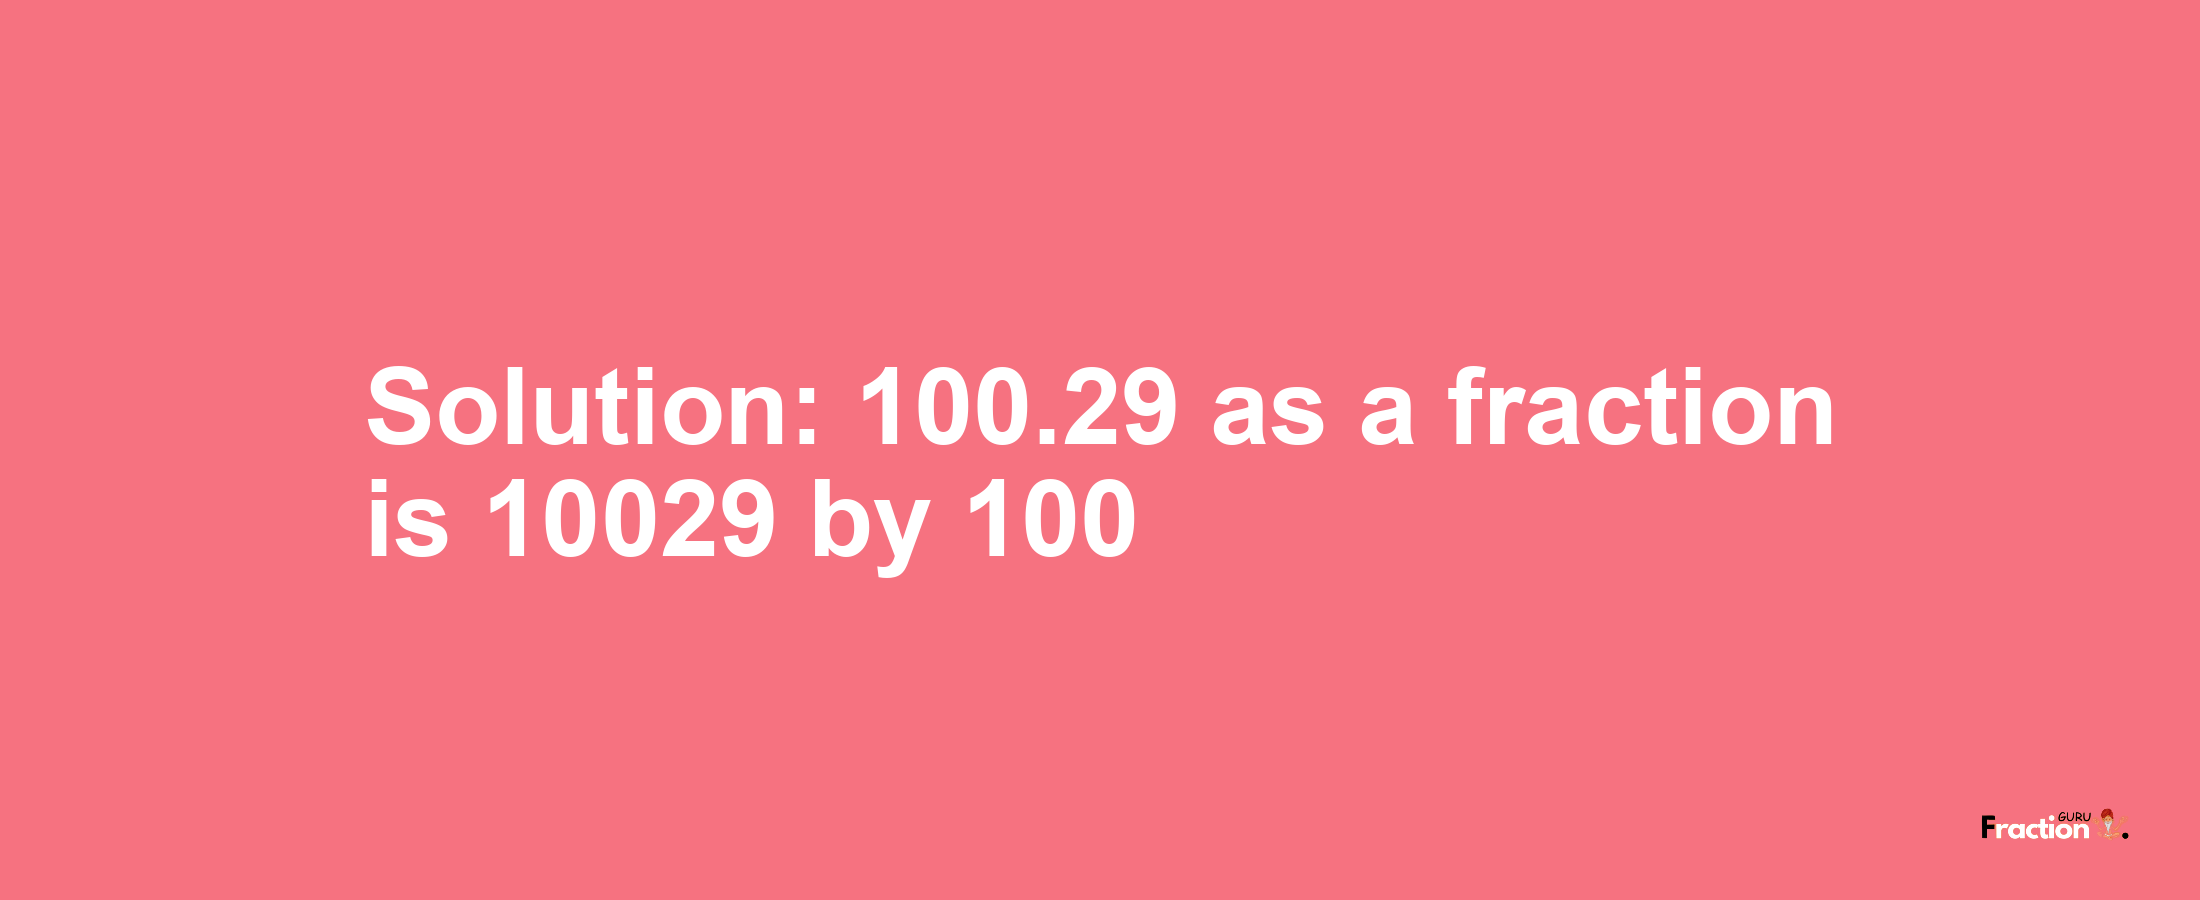 Solution:100.29 as a fraction is 10029/100